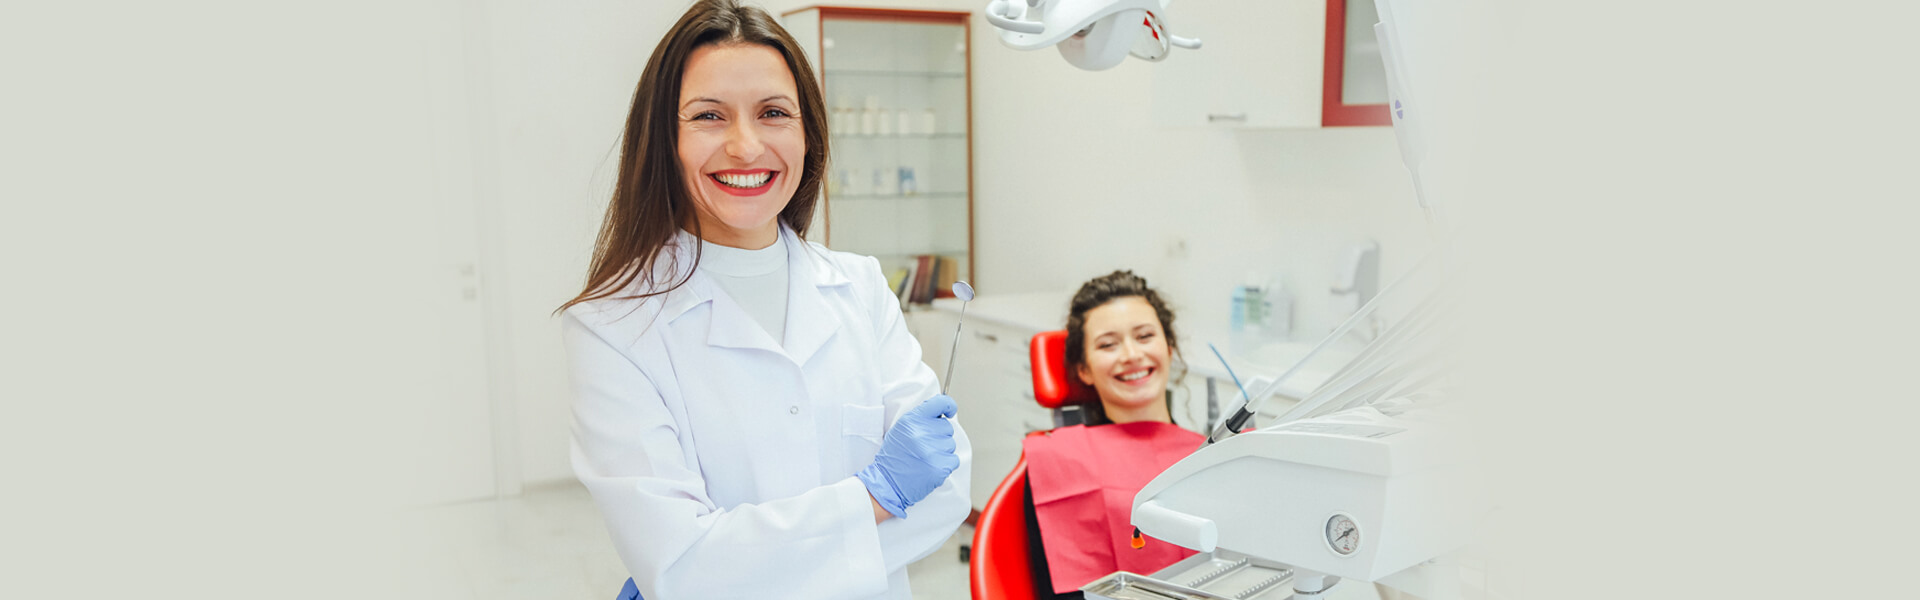 Why You Need to See the Dentist Every 6 Months